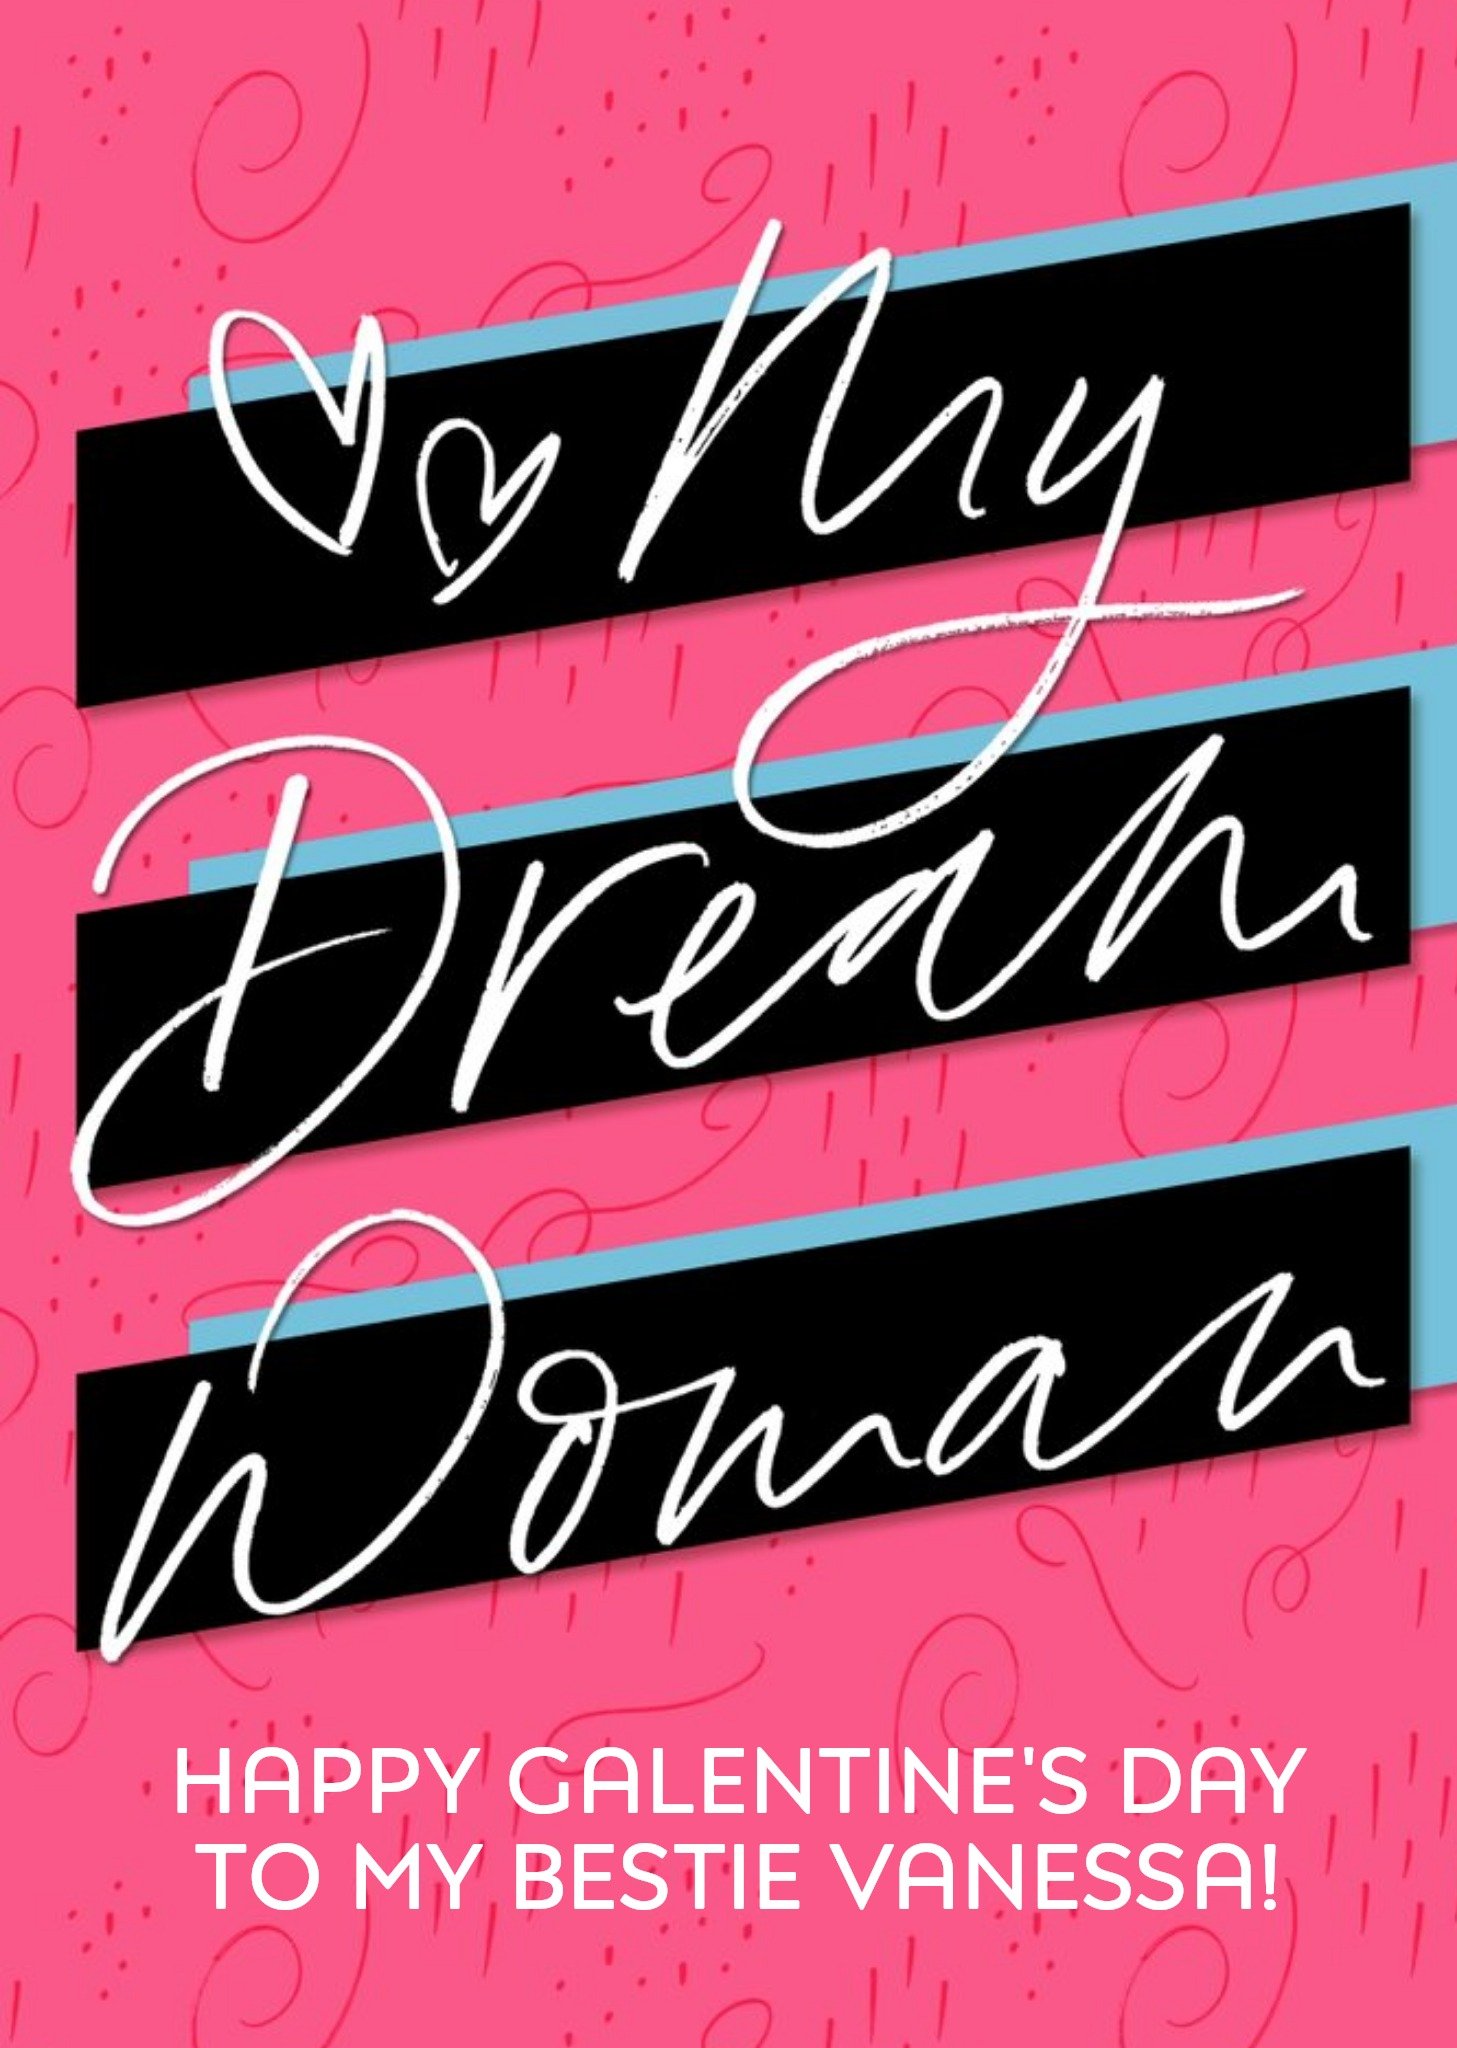 Moonpig Smooches Bright Graphic My Dream Woman Galentine's Valentine's Day Card, Large